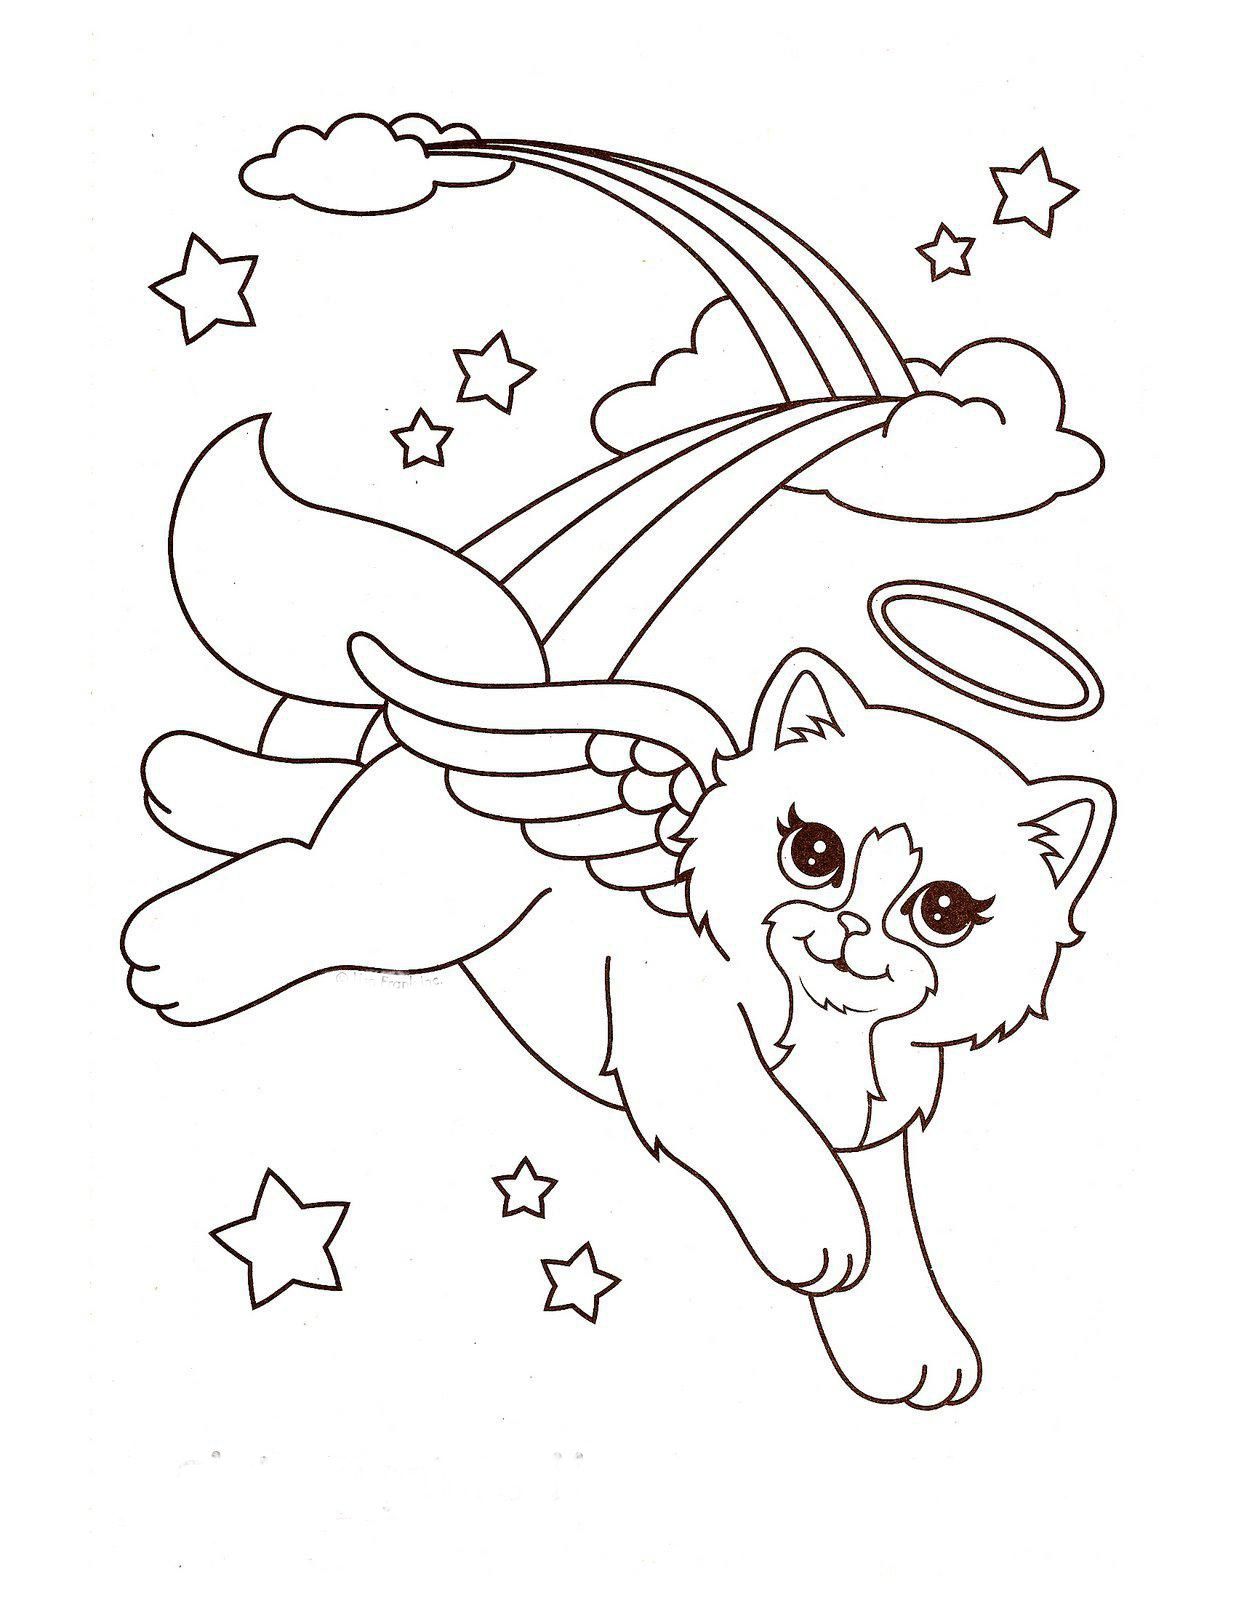 Angel Kitty From Lisa Frank Coloring Page